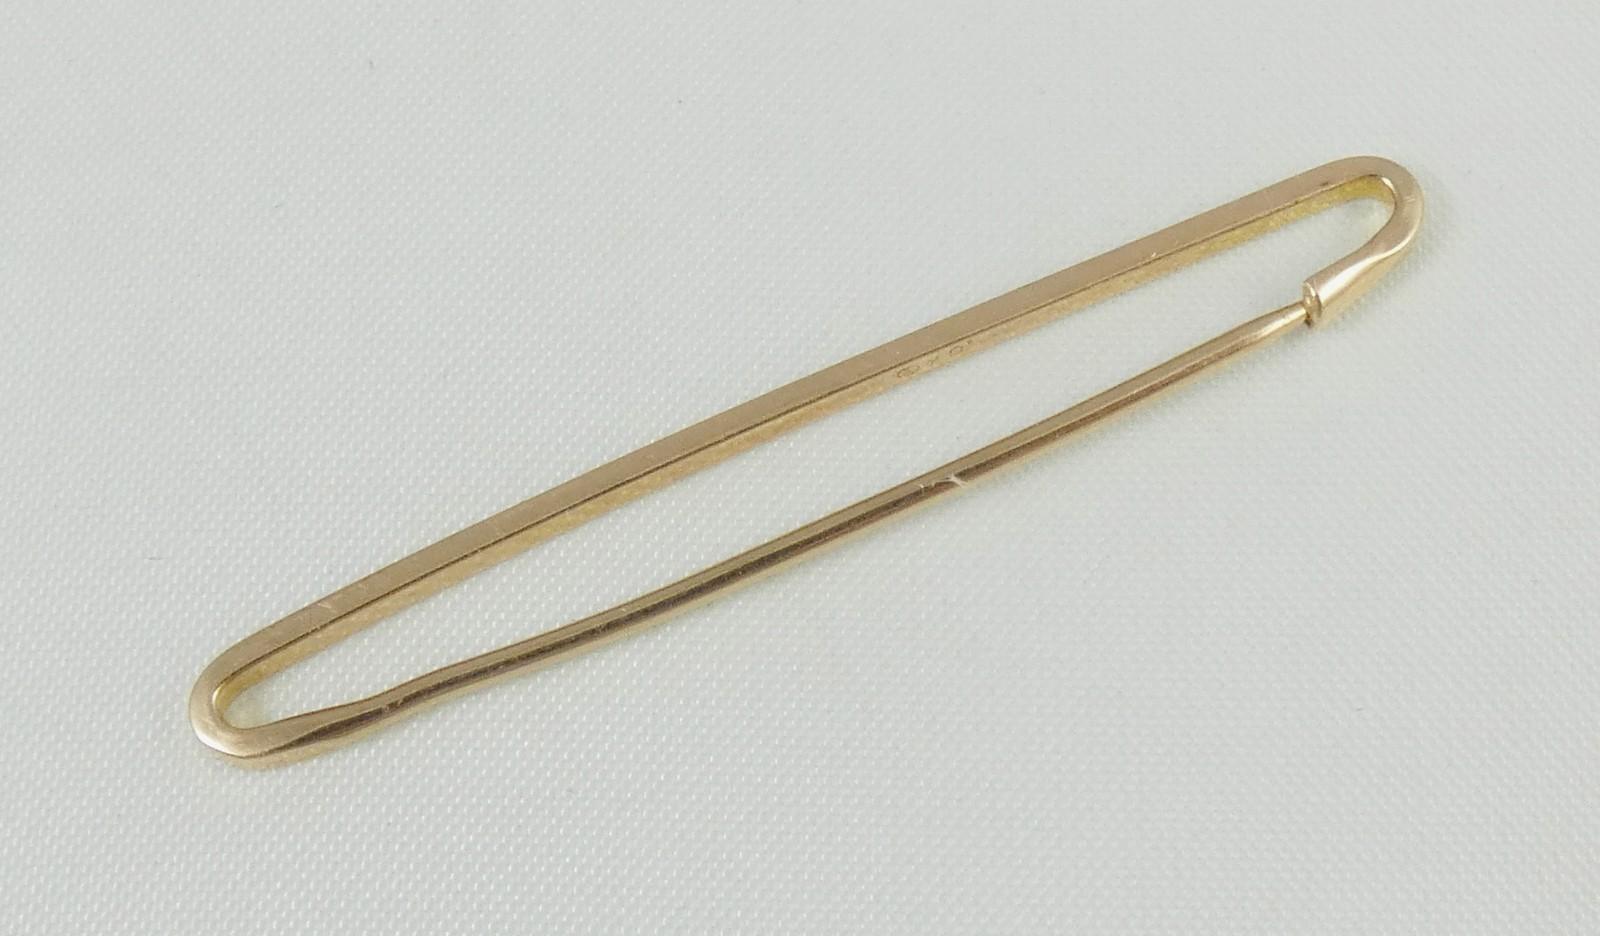 GOLD SAFETY PIN